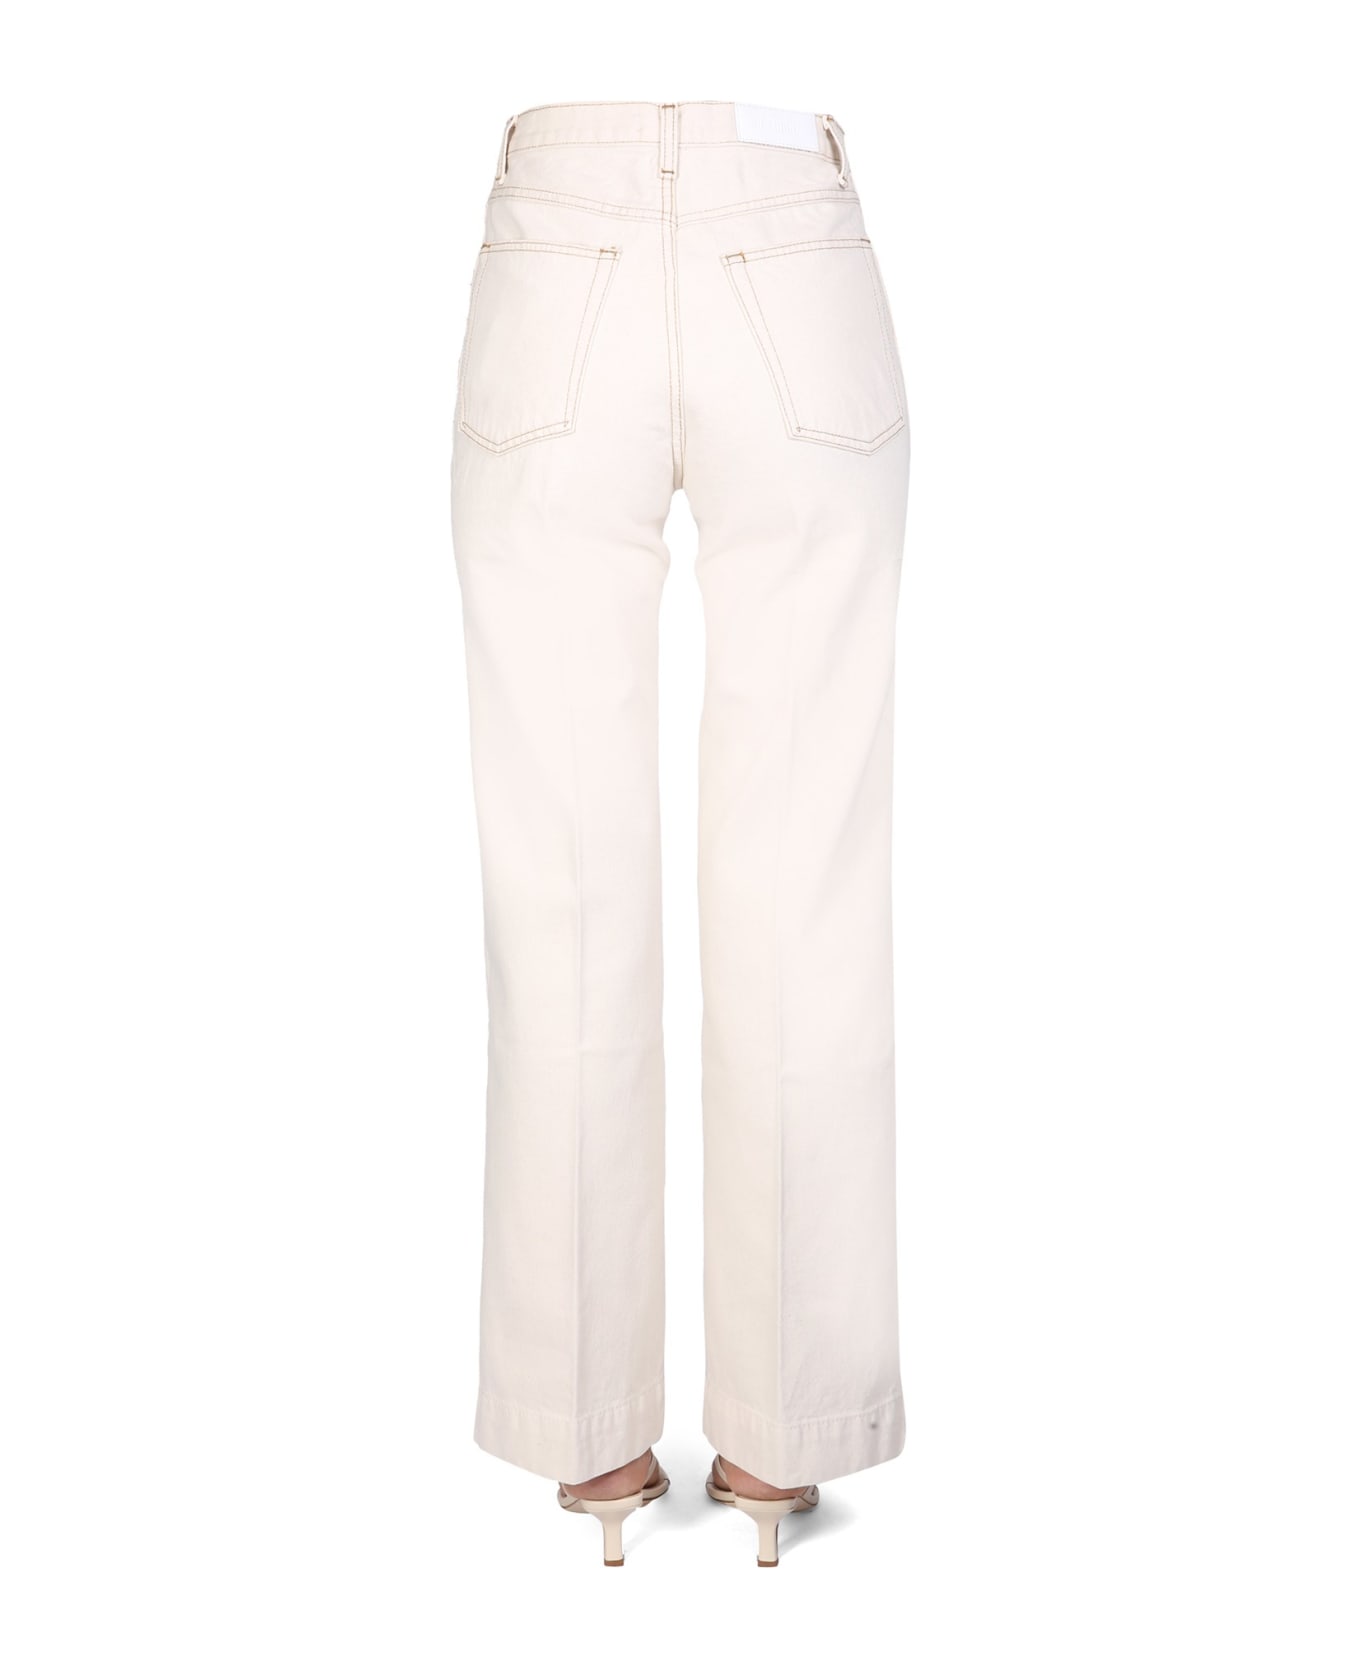 RE/DONE 70's Wide Leg Jeans - BIANCO